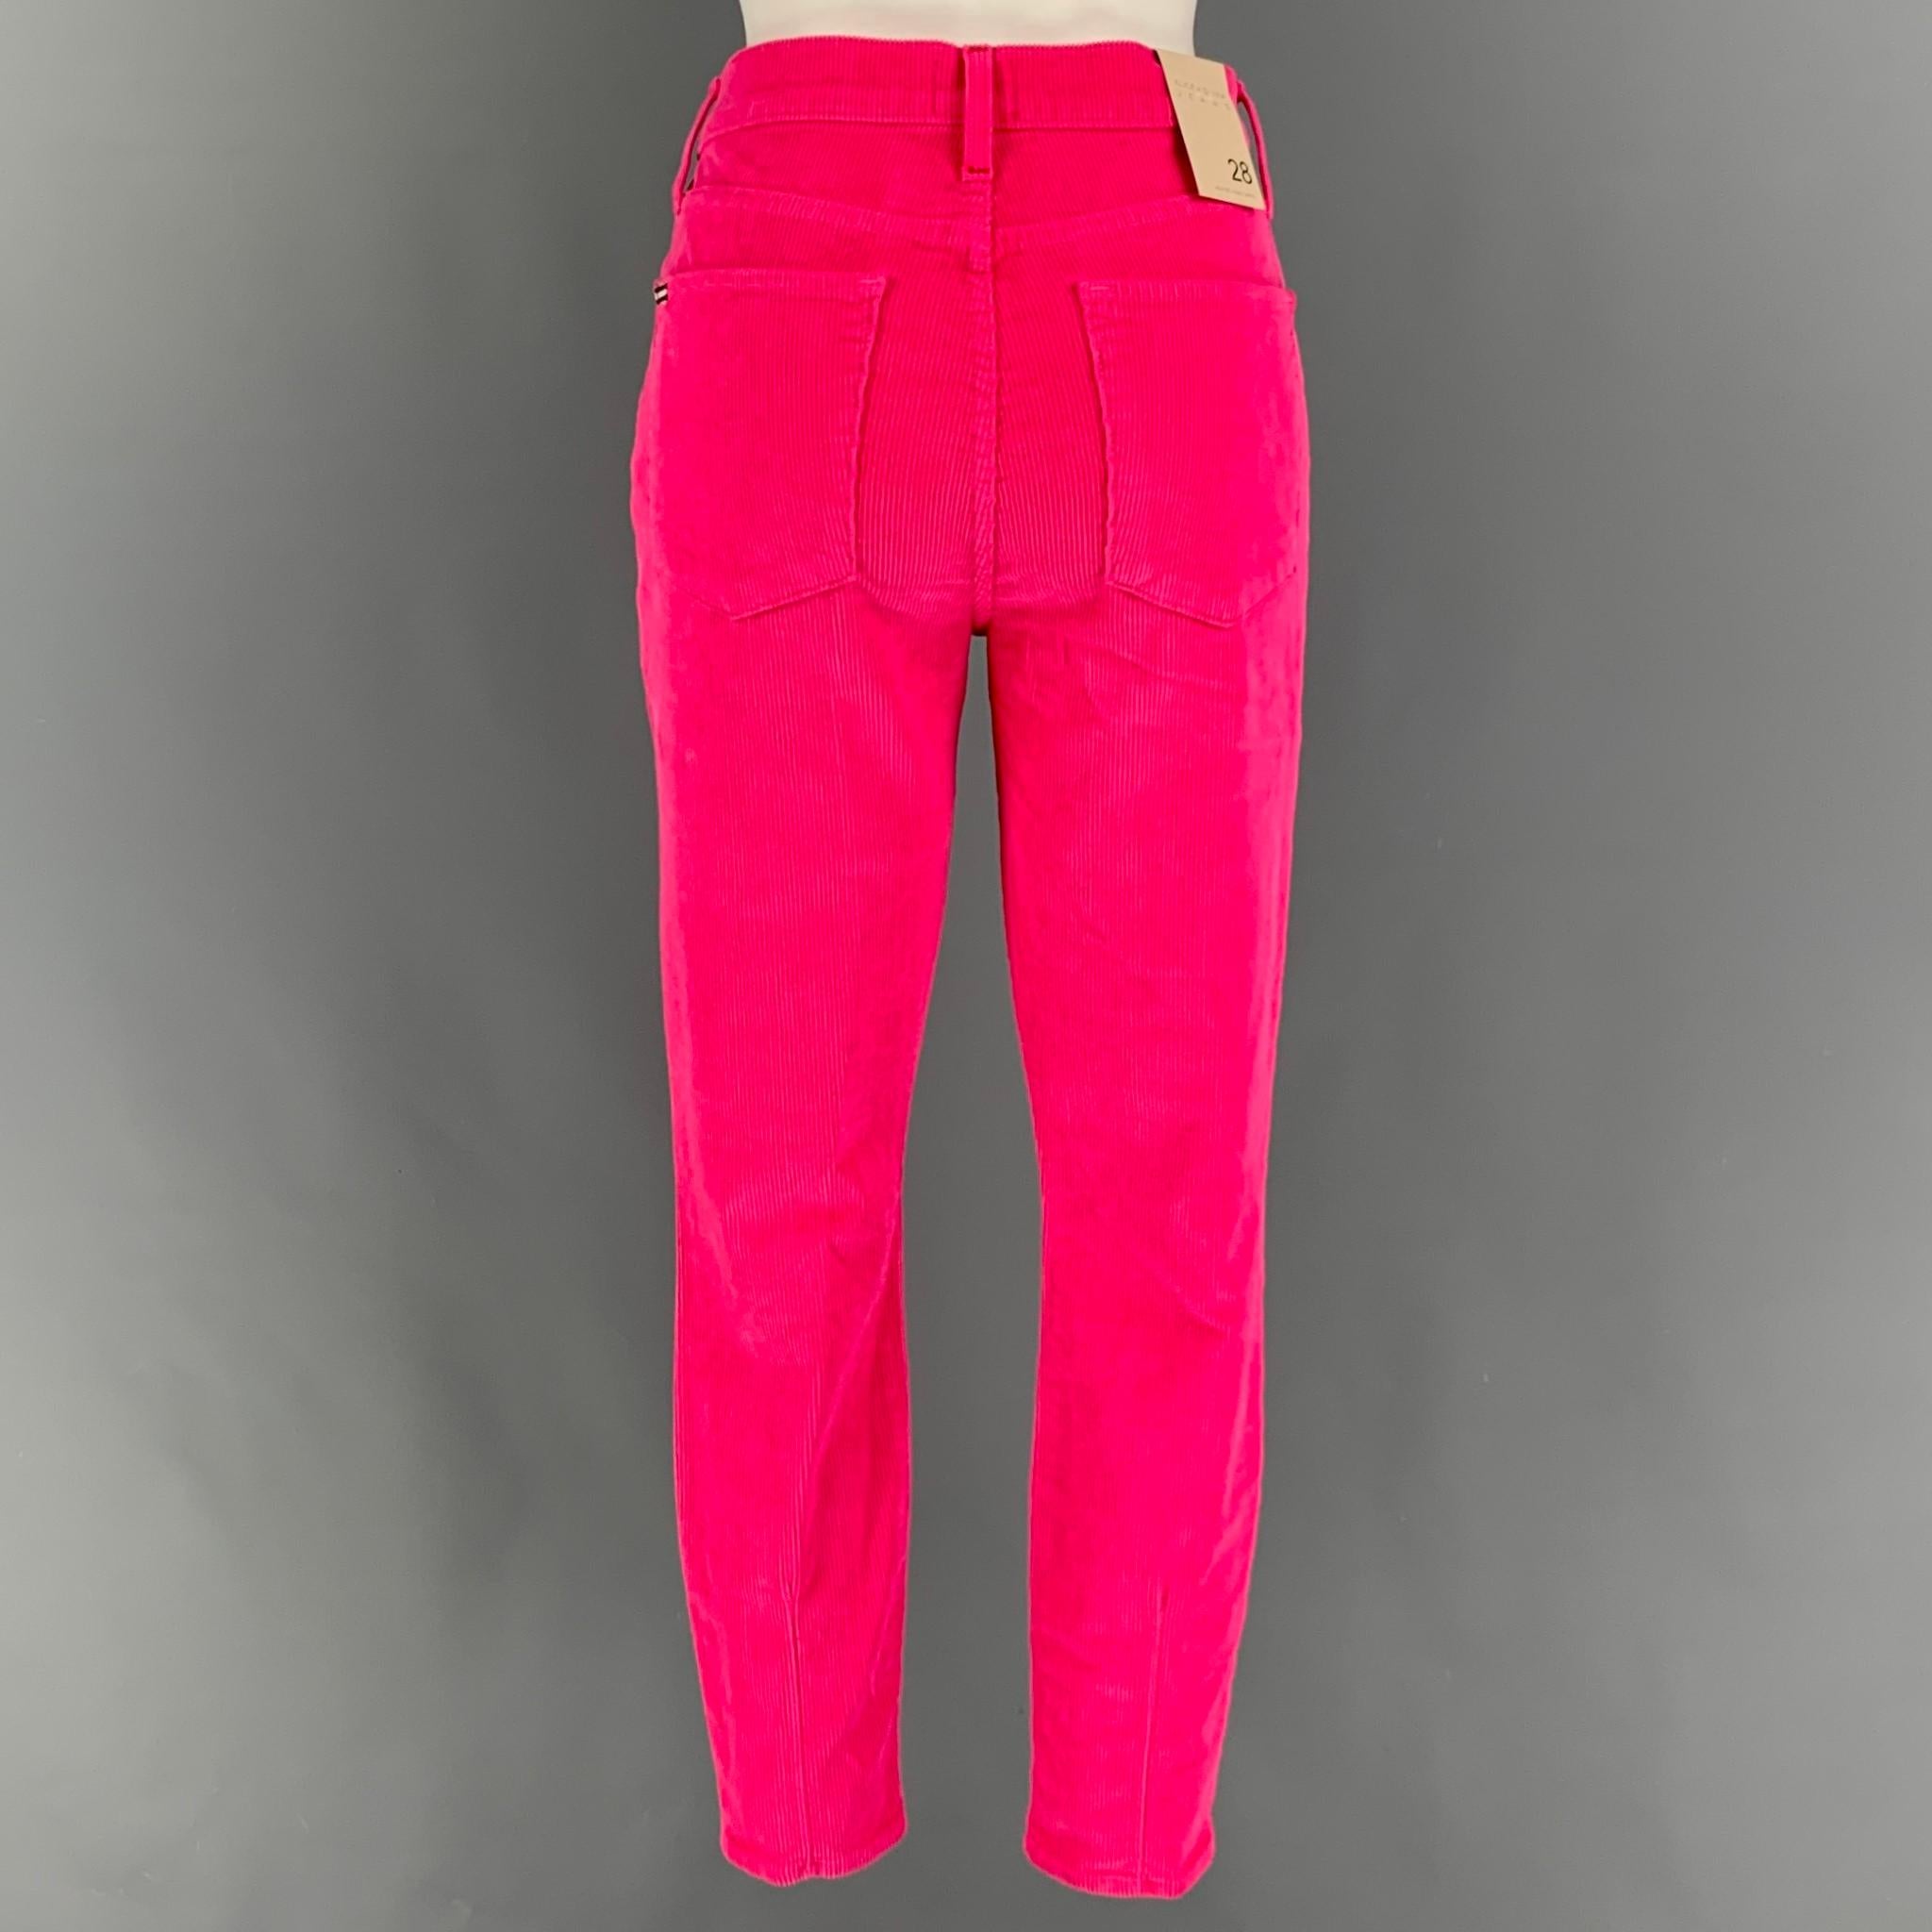 ALICE + OLIVIA casual pants comes in a pink cotton corduroy featuring a jean cut, skinny fit, and a zip fly closure. Made in USA.

New With Tags. 
Marked: 28
Original Retail price: $225.00

Measurements:

Waist: 28 in.
Rise: 11 in.
Inseam: 27 in. 

 